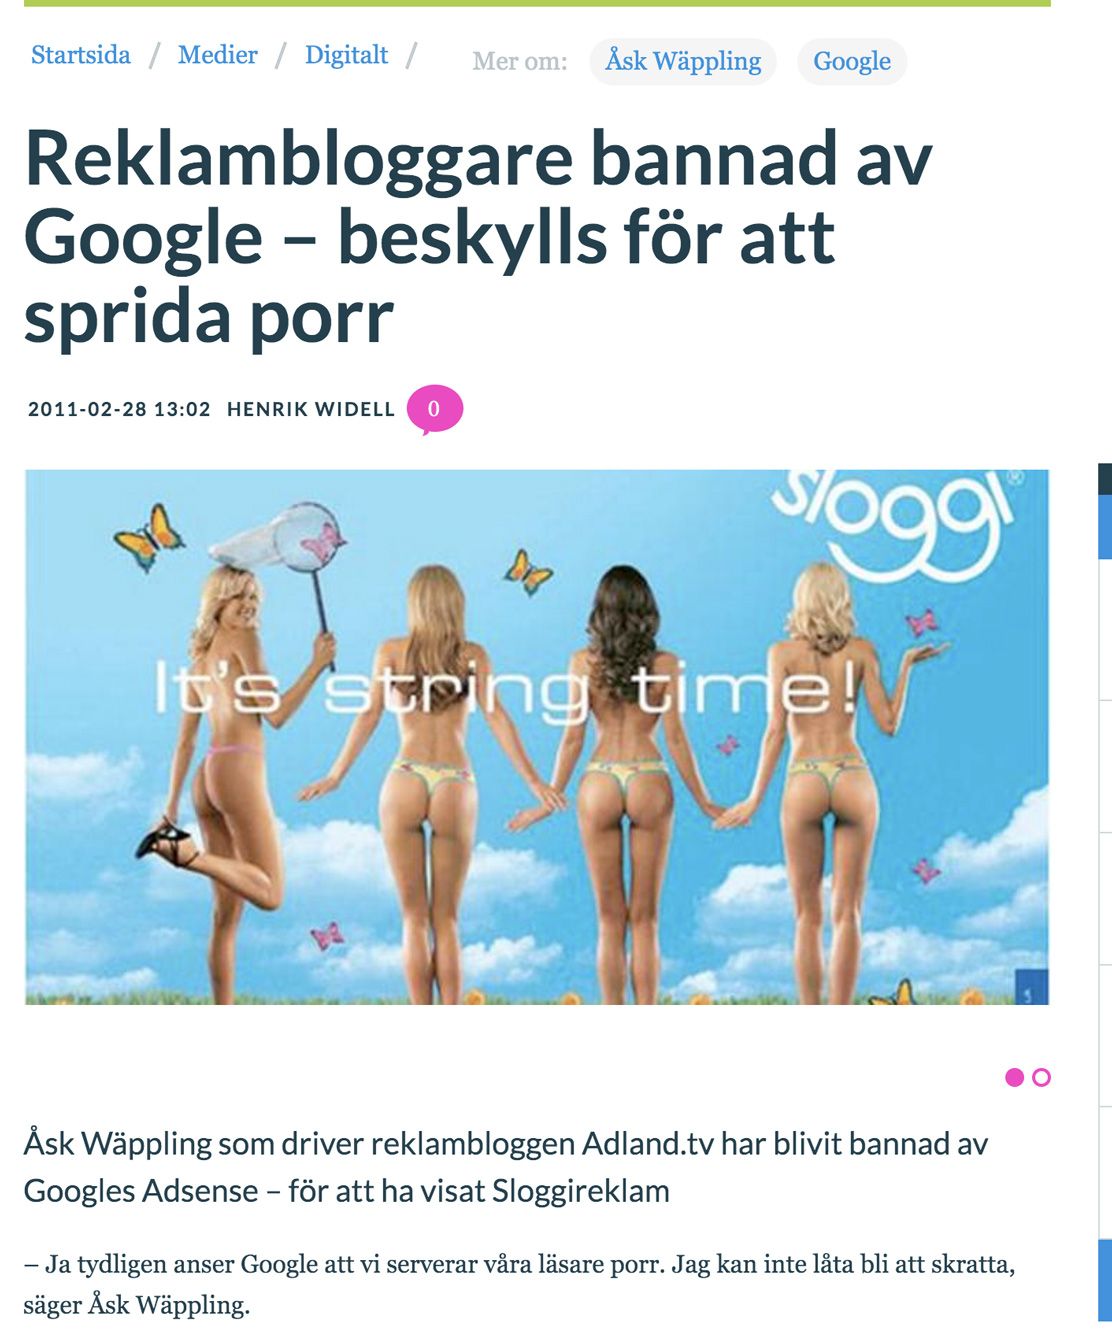 Dagens Media: "Ad blogger banned by Google, accused of spreading pornography"